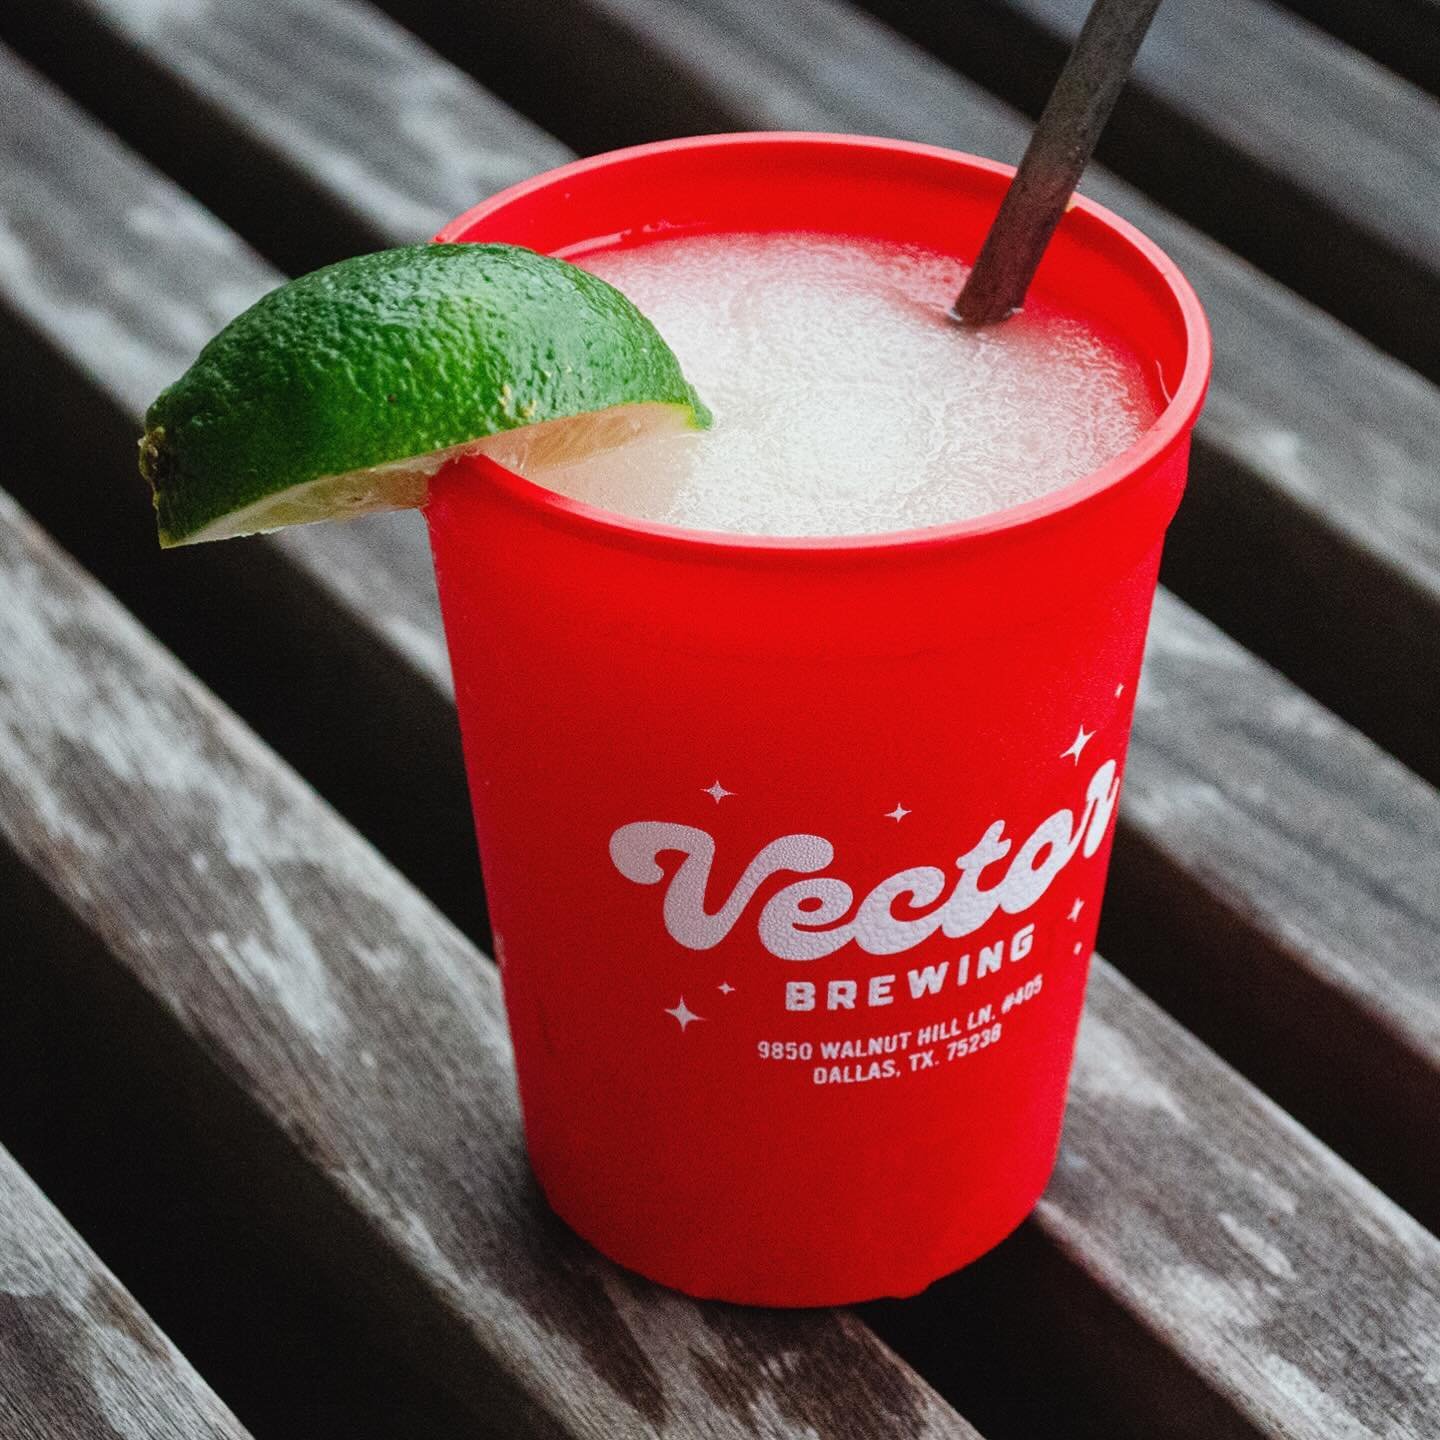 &Oacute;rale! Get out of the rain and stop on in tonight for a frozen marg! Wait, we have margaritas? Yeah we do! The 𝑪𝑯𝑼𝑳𝑶 is our frozen blend of cucumber, jalape&ntilde;o, lime, sugar, tequila, and sake &ndash; served in our souvenir cup for a